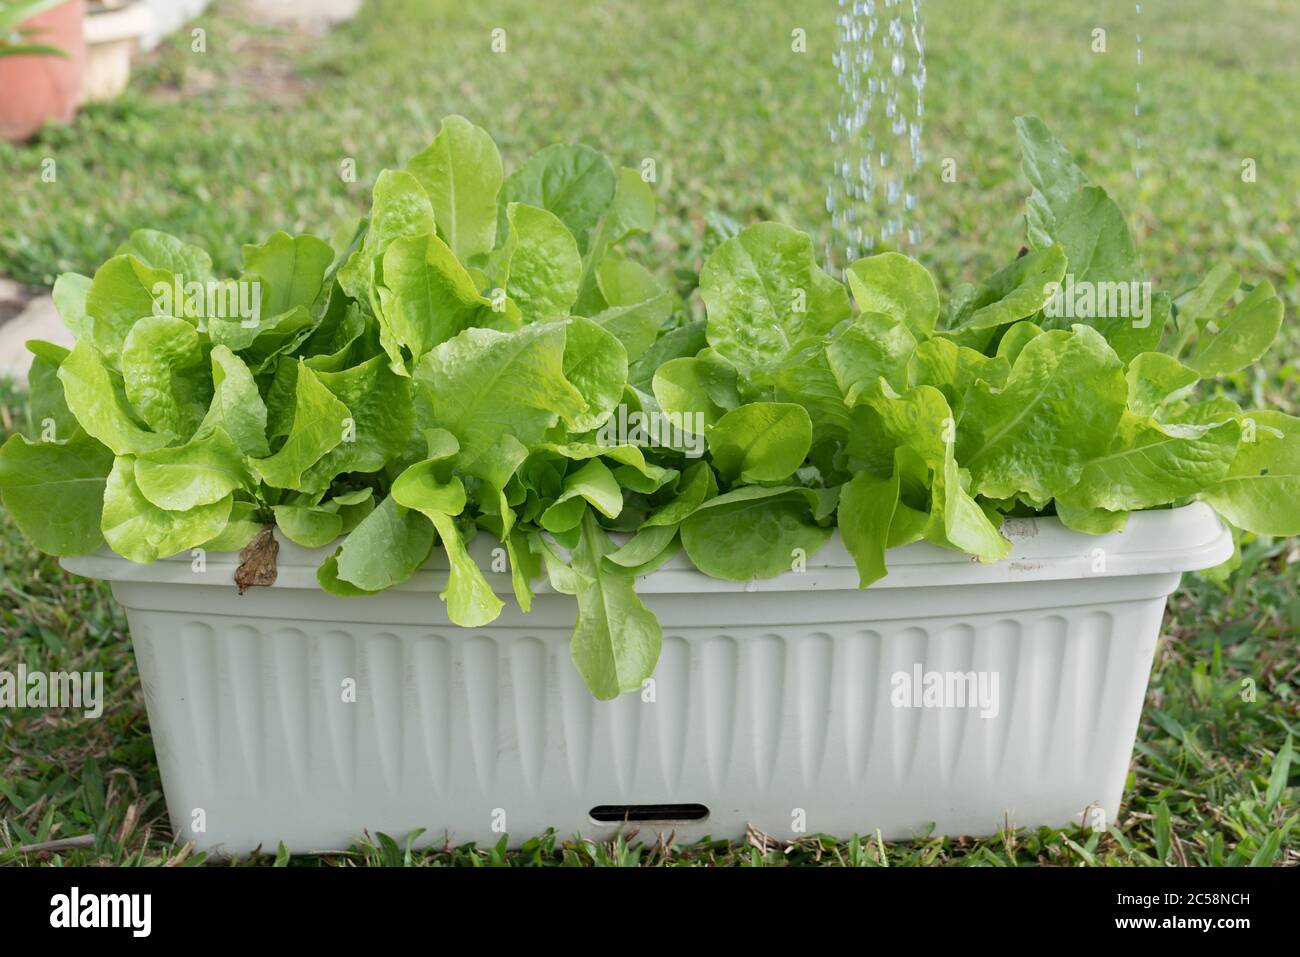 Healthy Romaine and loose leaf lettuce plants being watered with liquid fertiliser / fertilizer Stock Photo